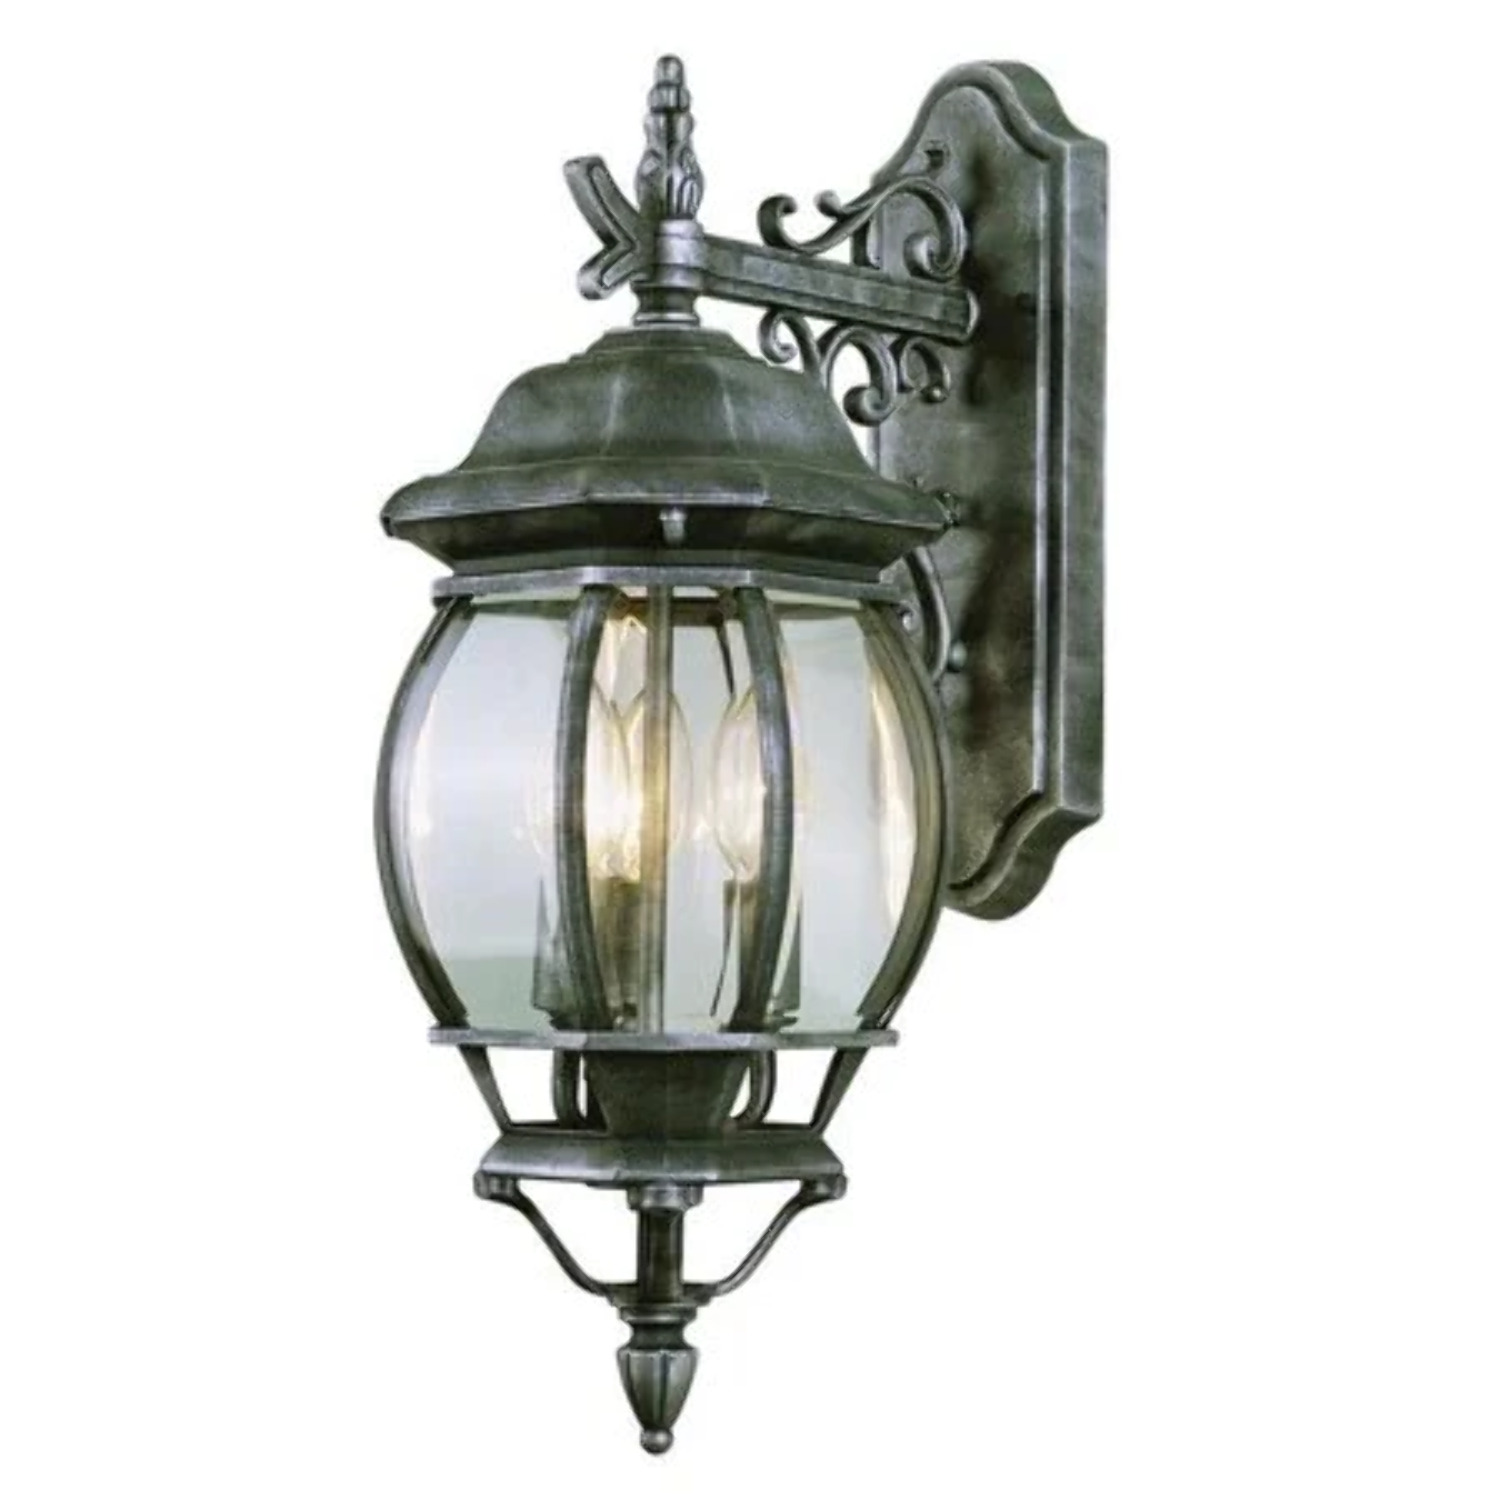 Bel Air Lighting Francisco 21 in. 3-Light Rust Lantern Outdoor Wall Light Fixture with Clear Glass - image 1 of 2